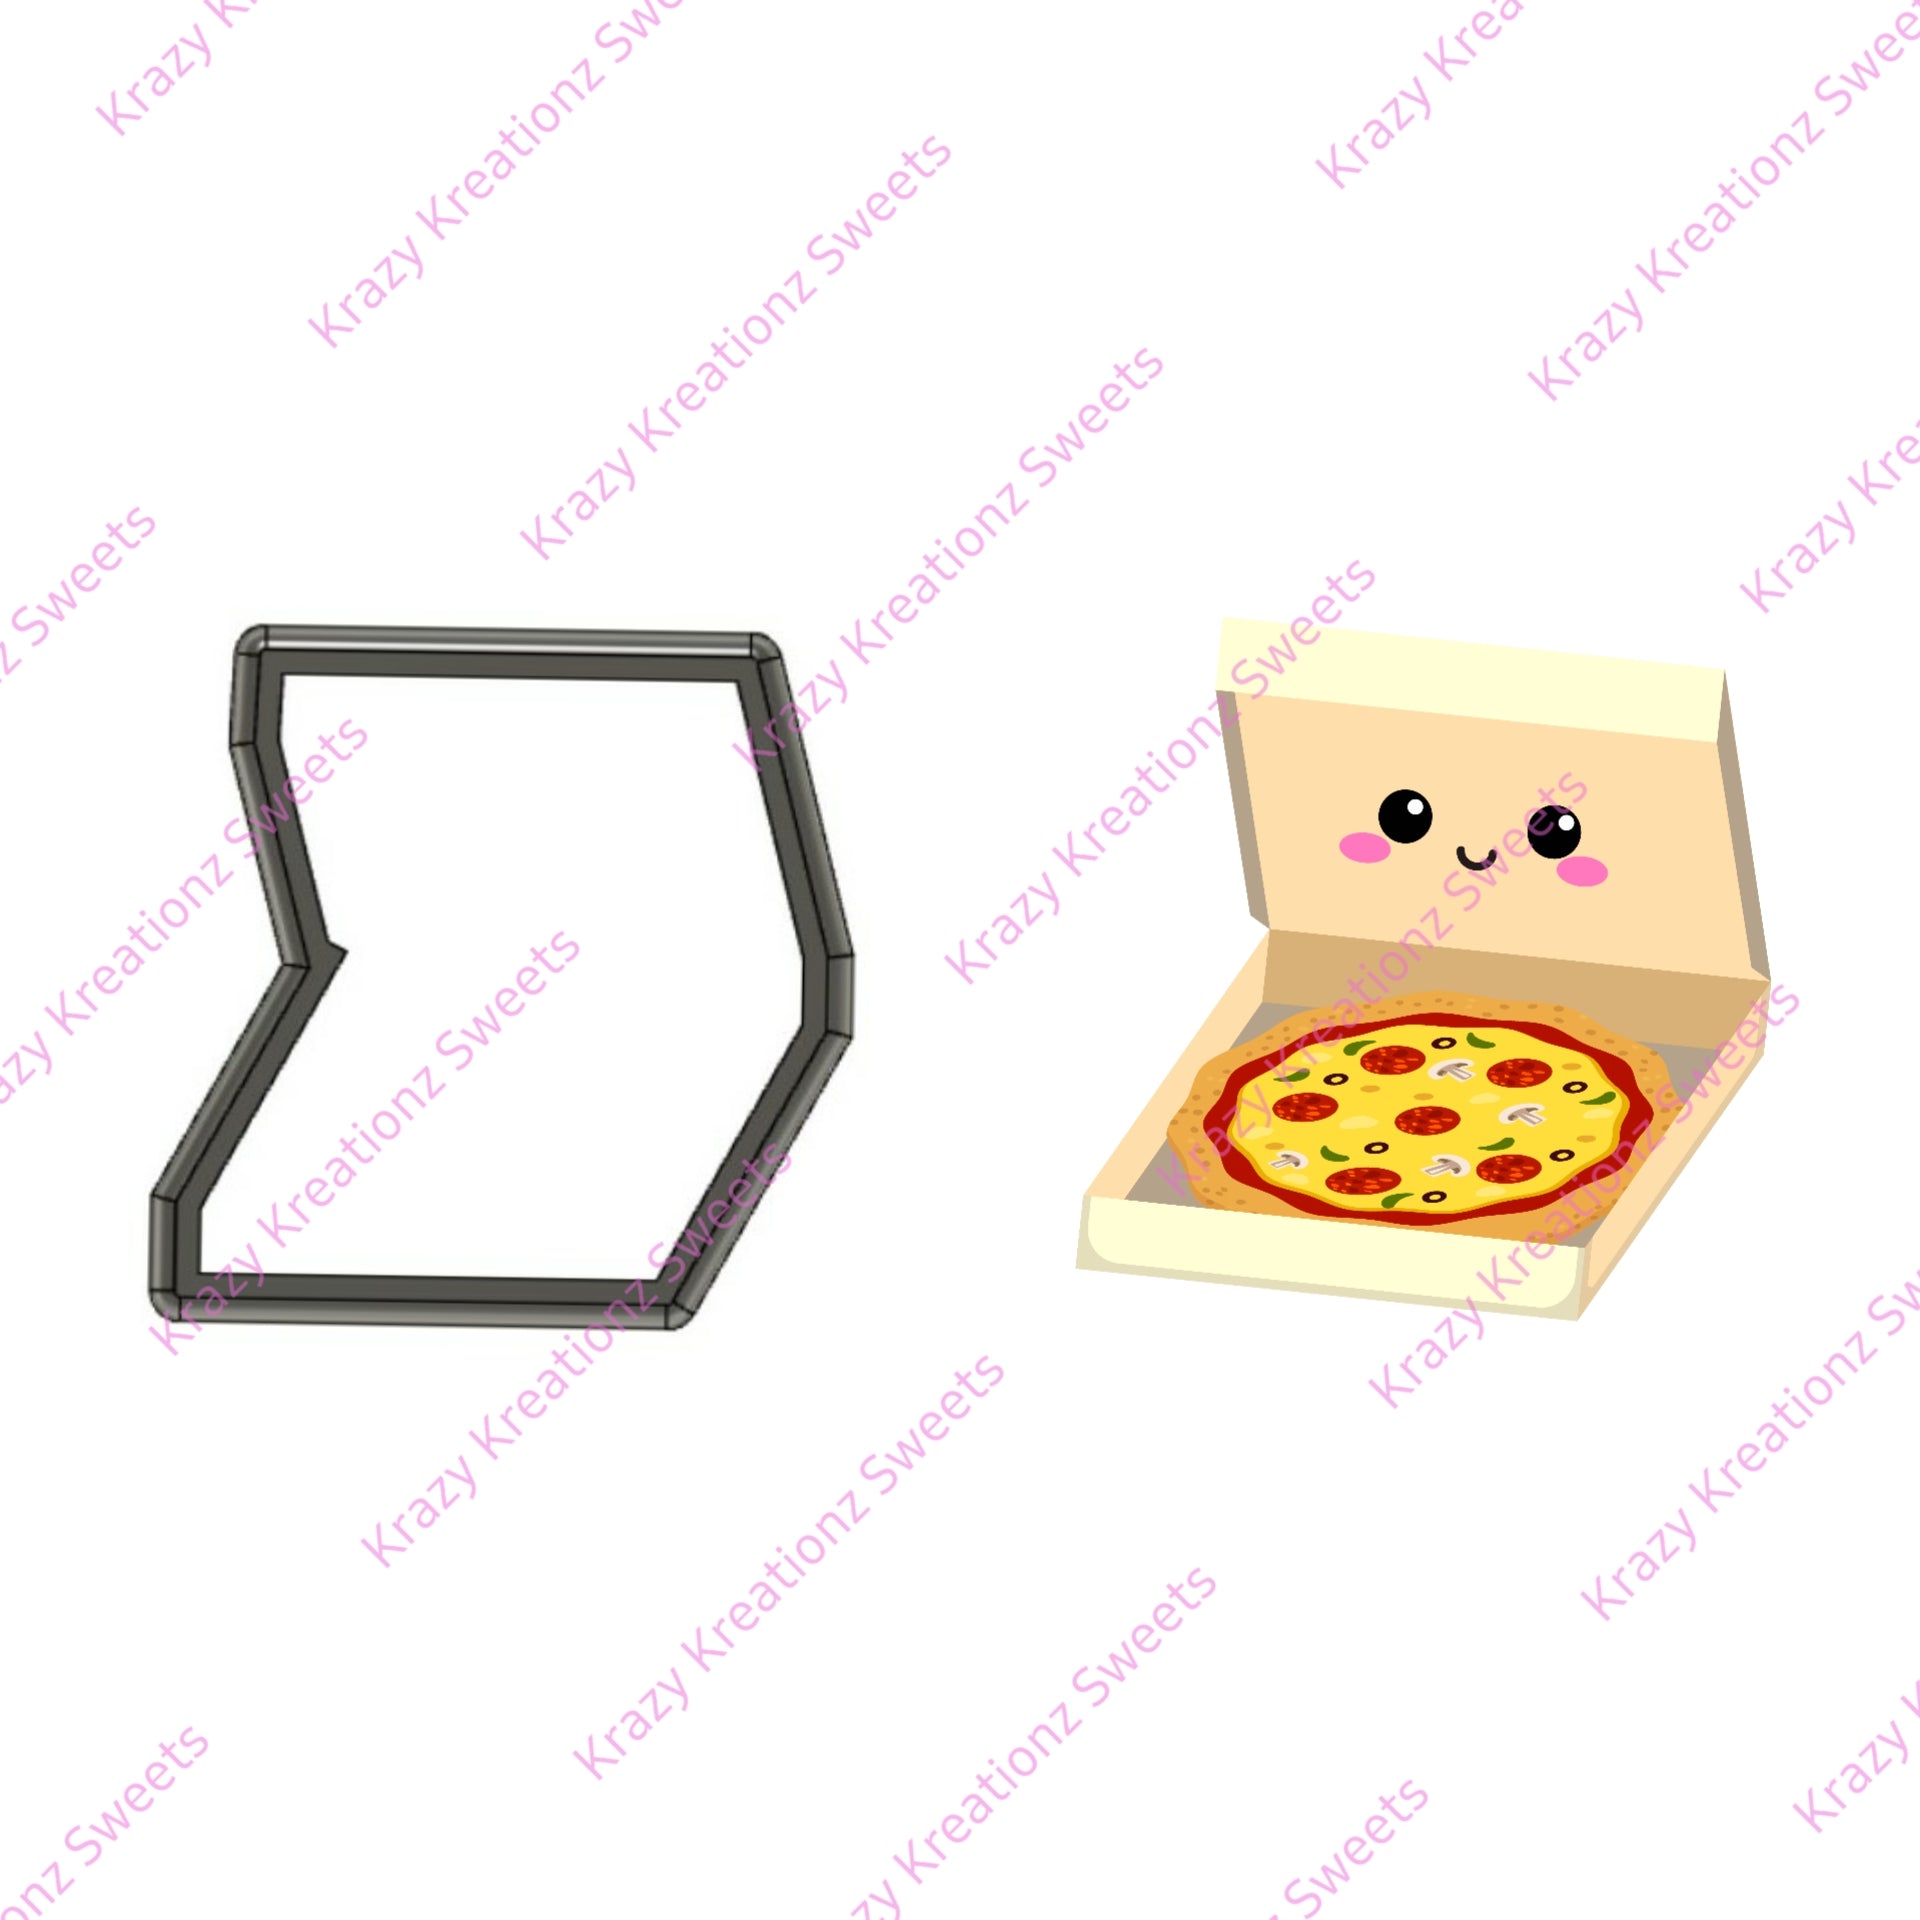 Smiley Pizza Box Cookie Cutter